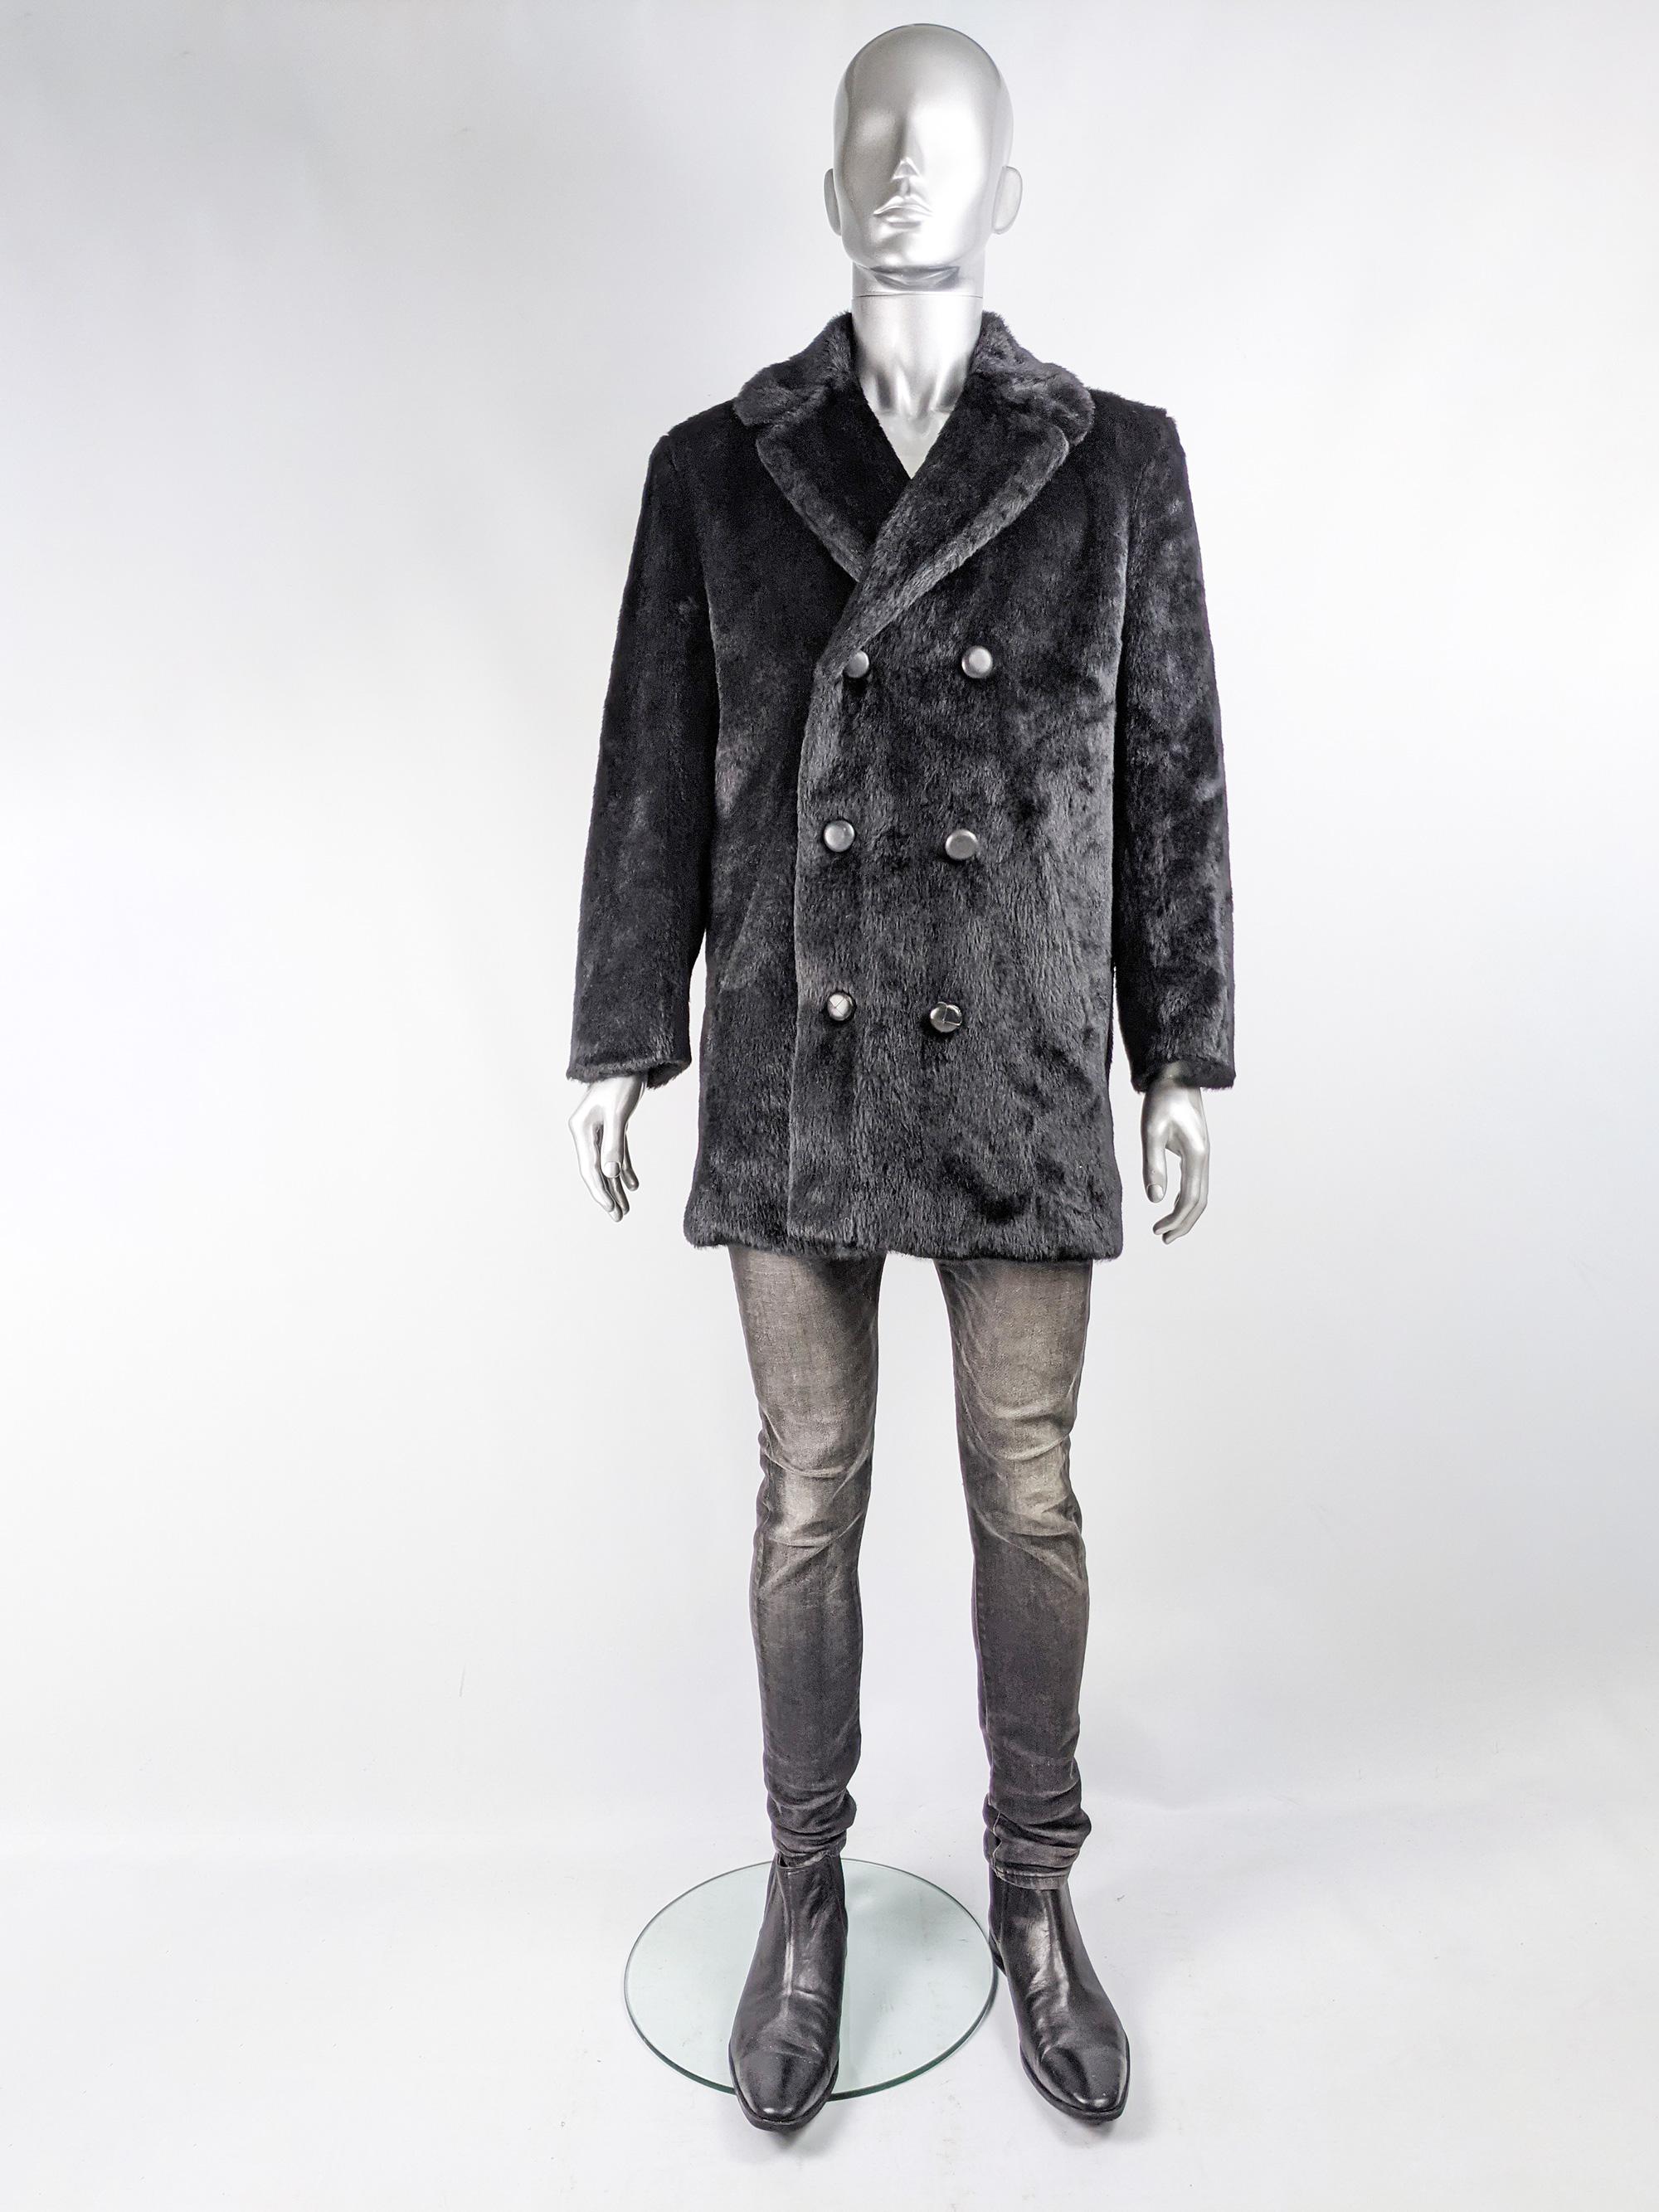 An absolutely amazing and super rare vintage mens faux fur coat from the 70s by luxury British fashion designer Hardy Amies for Hepworths. In a soft, black fake fur, it is really hard to find original men's faux fur coats from the seventies, a real